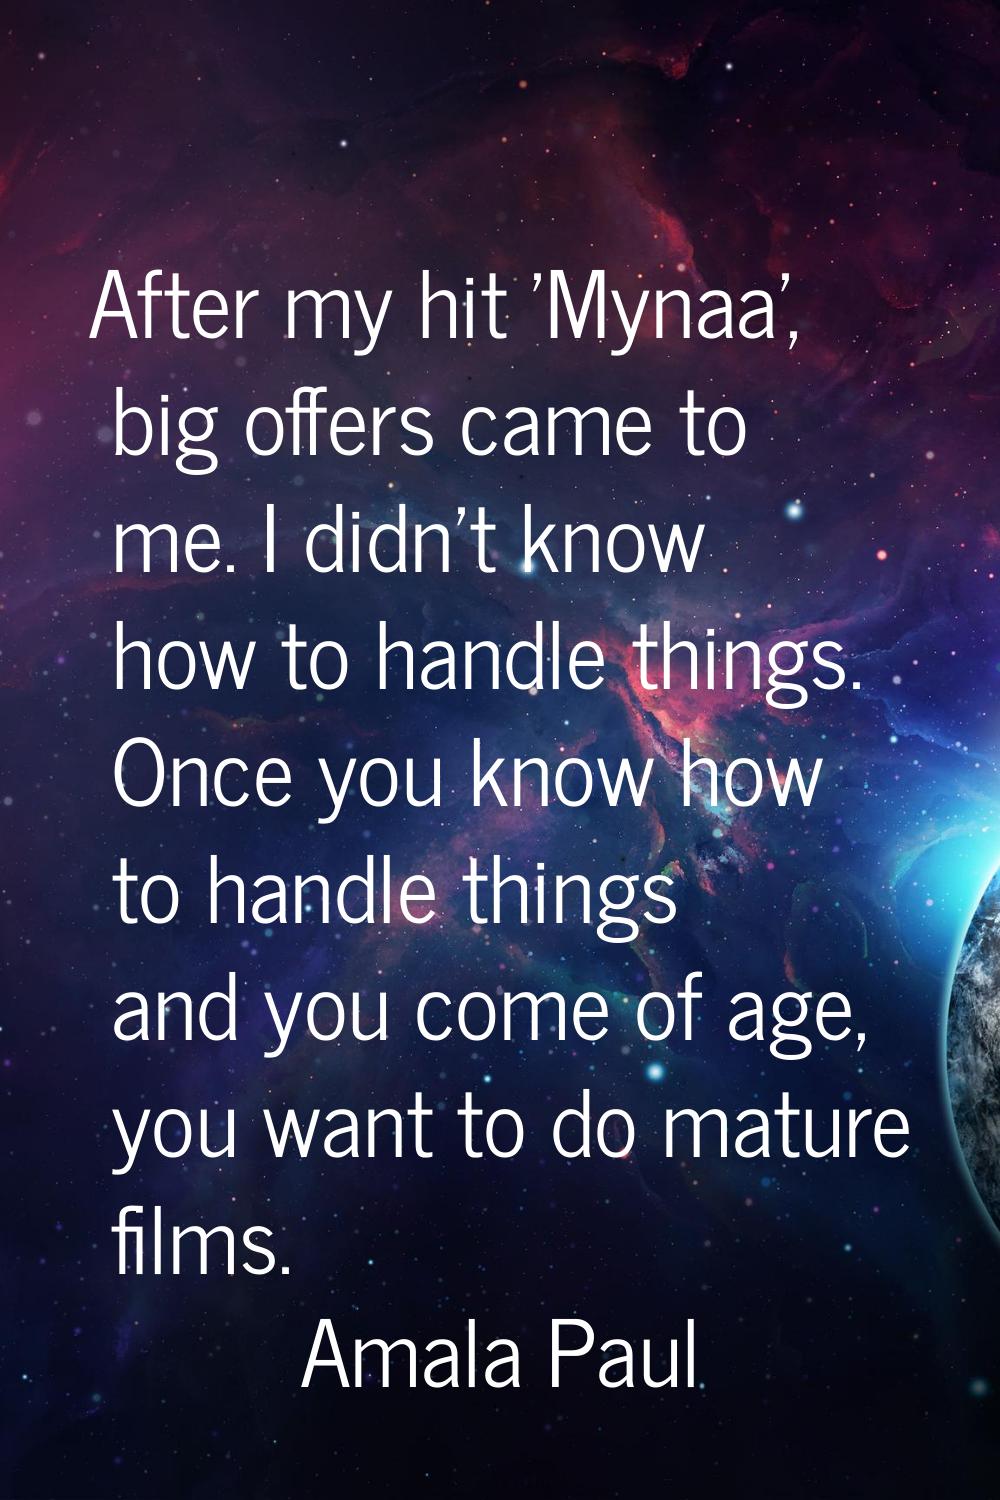 After my hit 'Mynaa', big offers came to me. I didn't know how to handle things. Once you know how 